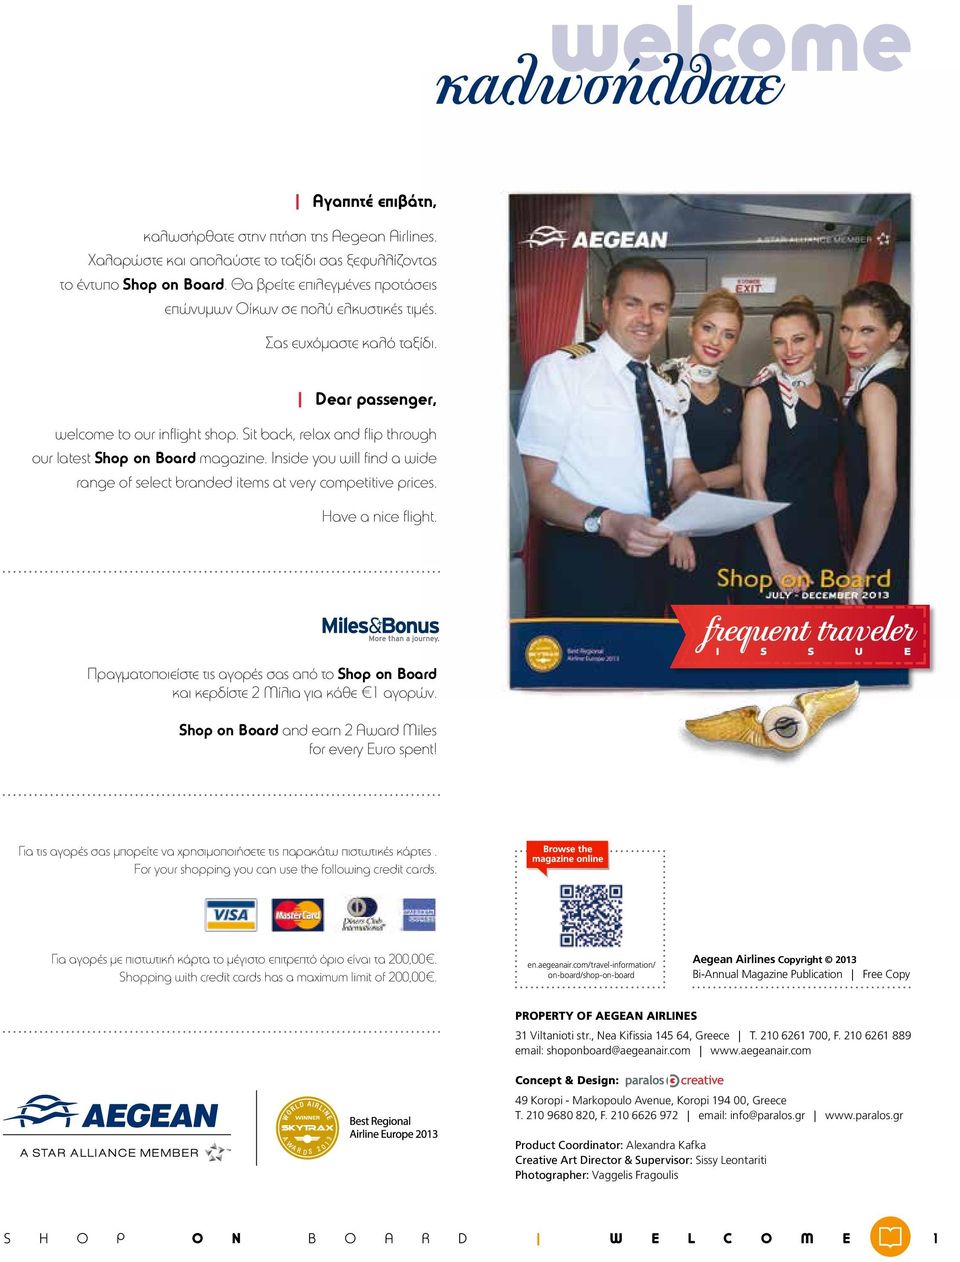 Sit back, relax and flip through our latest Shop on Board magazine. Inside you will find a wide range of select branded items at very competitive prices. Have a nice flight.